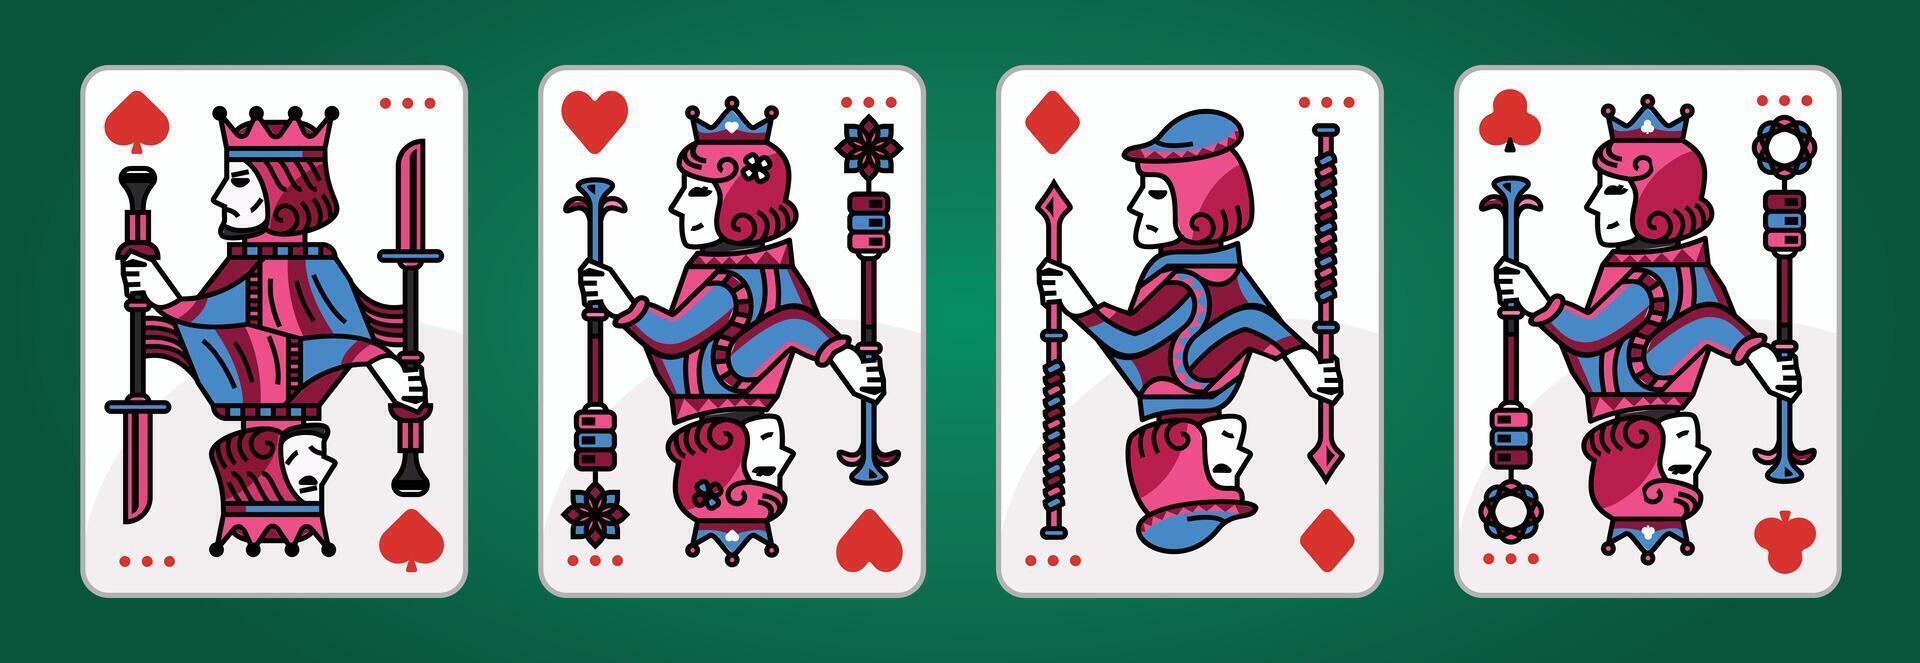 King and queen card illustration set of hearts, Spade, Diamond and Club, Royal cards design collection vector